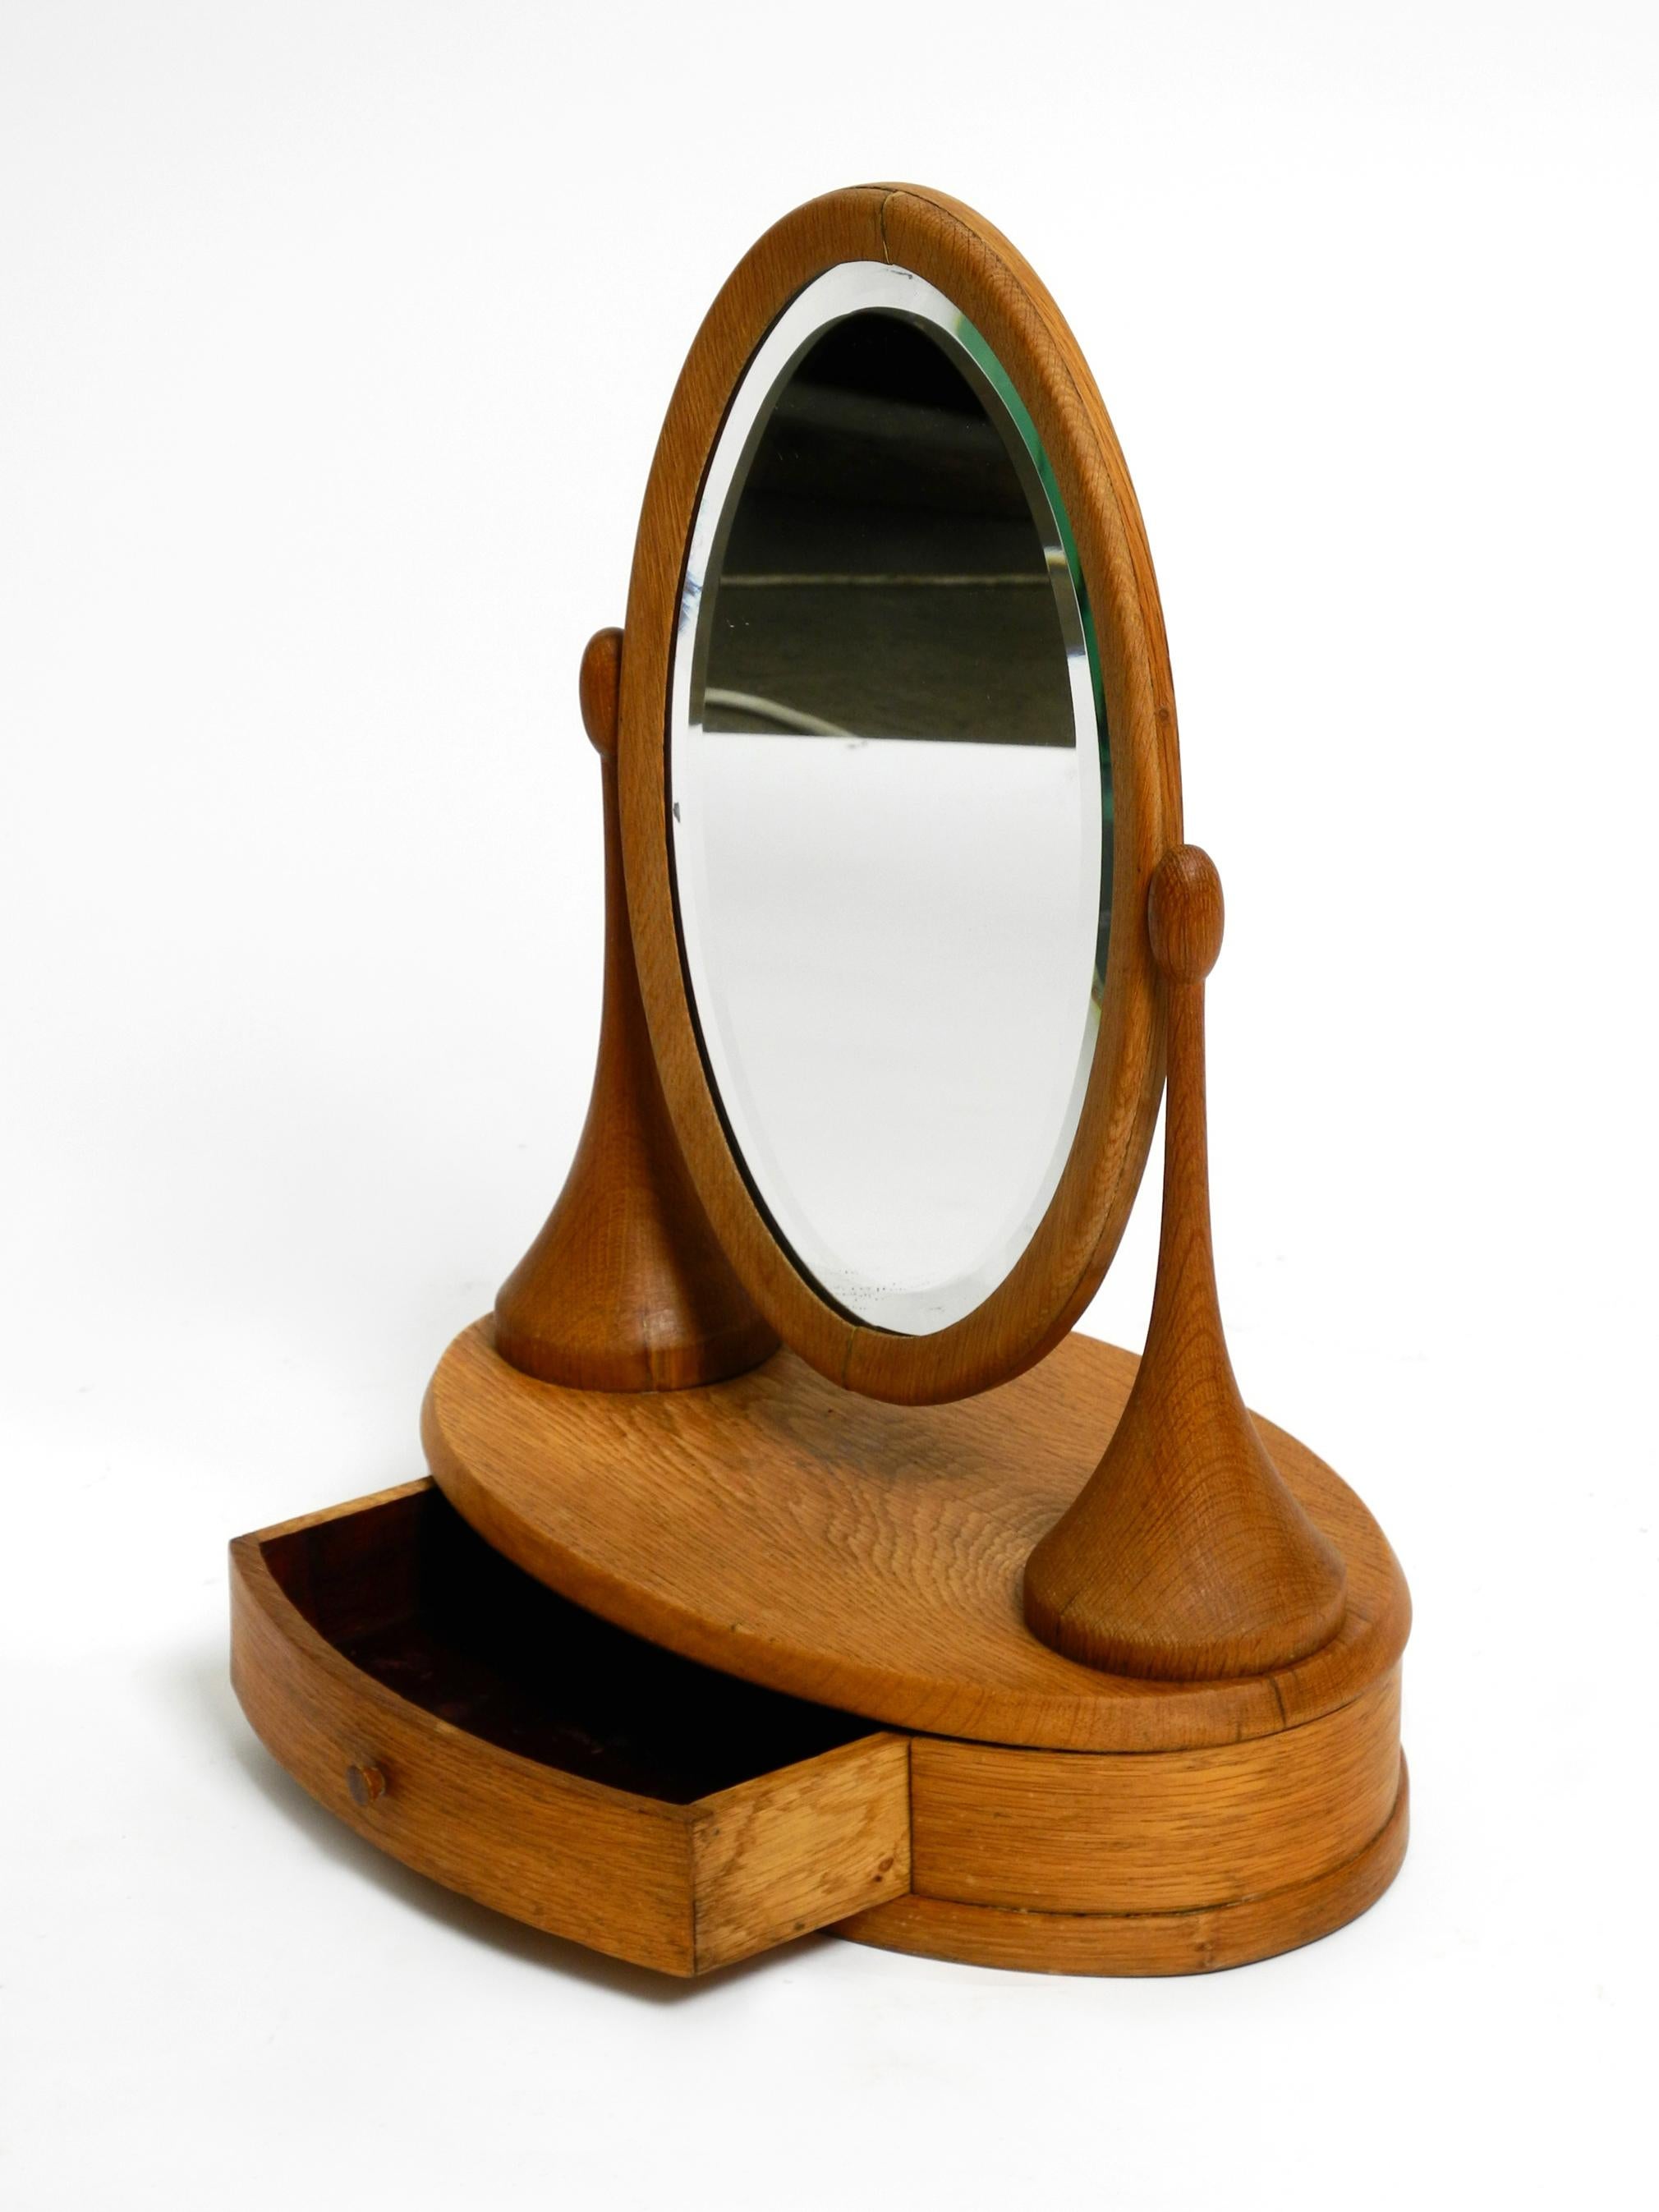 Extraordinary Beautiful 1920s Oak Table Mirror with Drawer For Sale 5